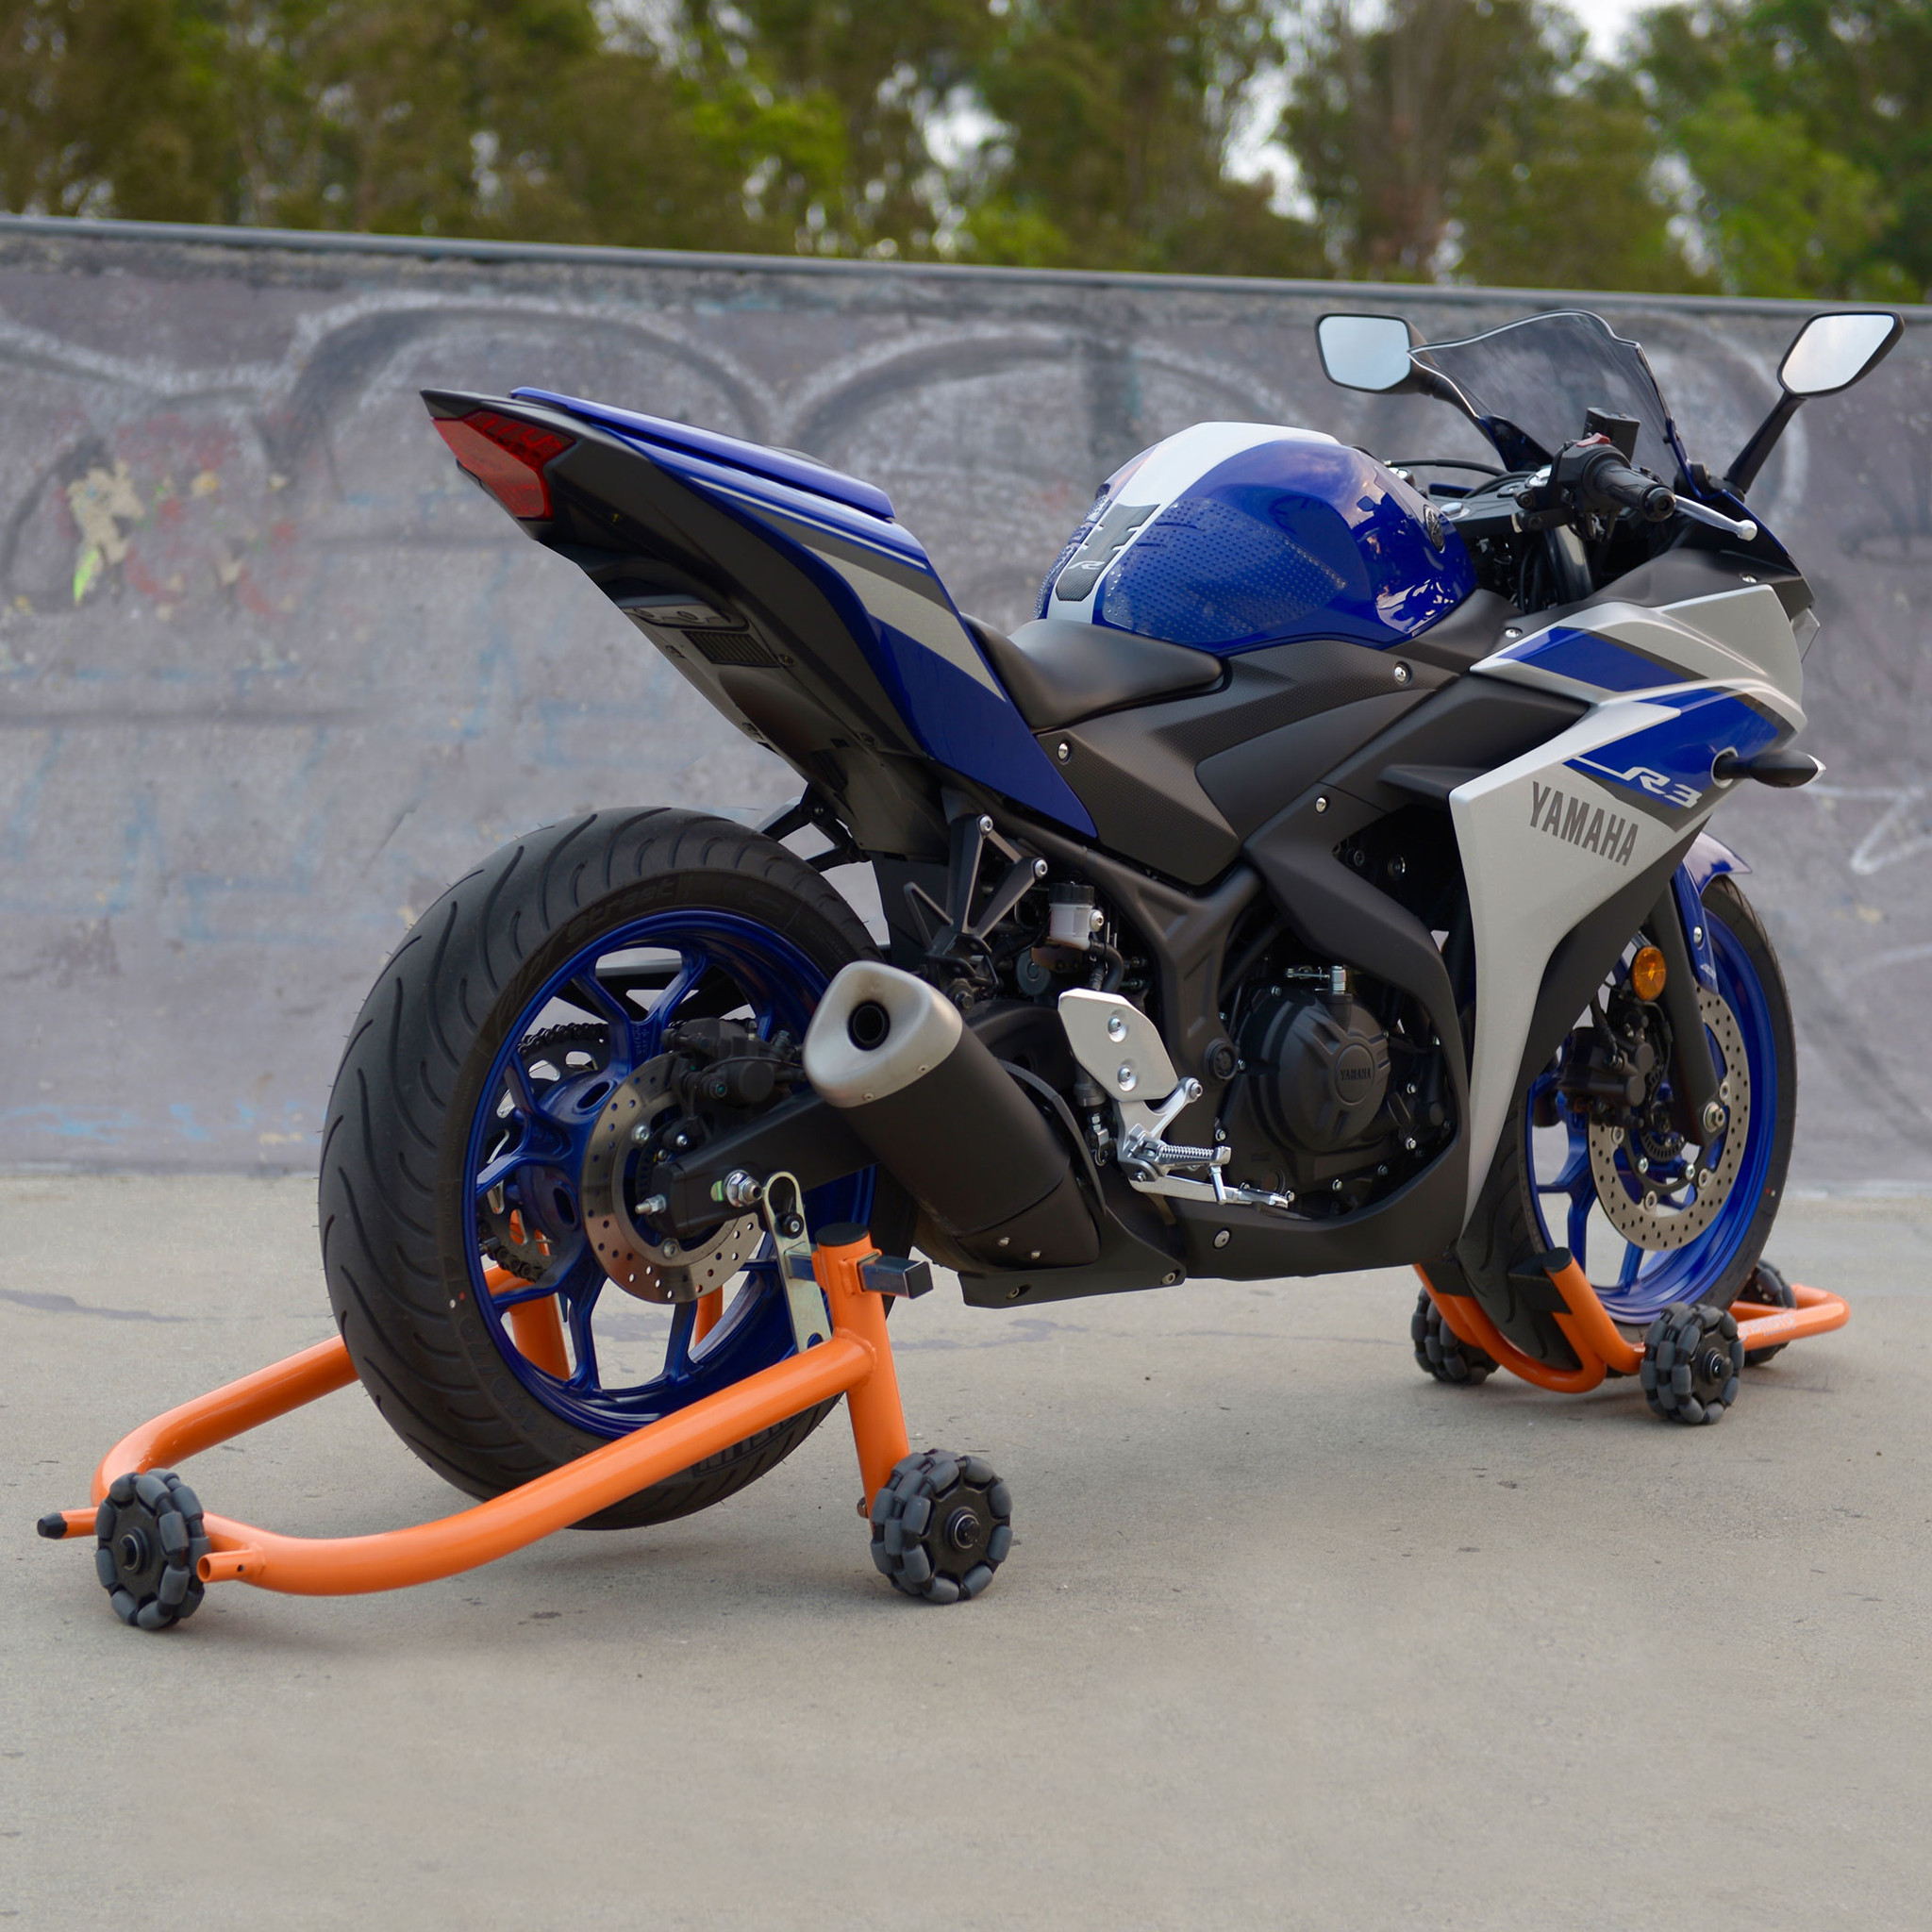 Omni-directional stand lets you easily move your motorcycle around ...